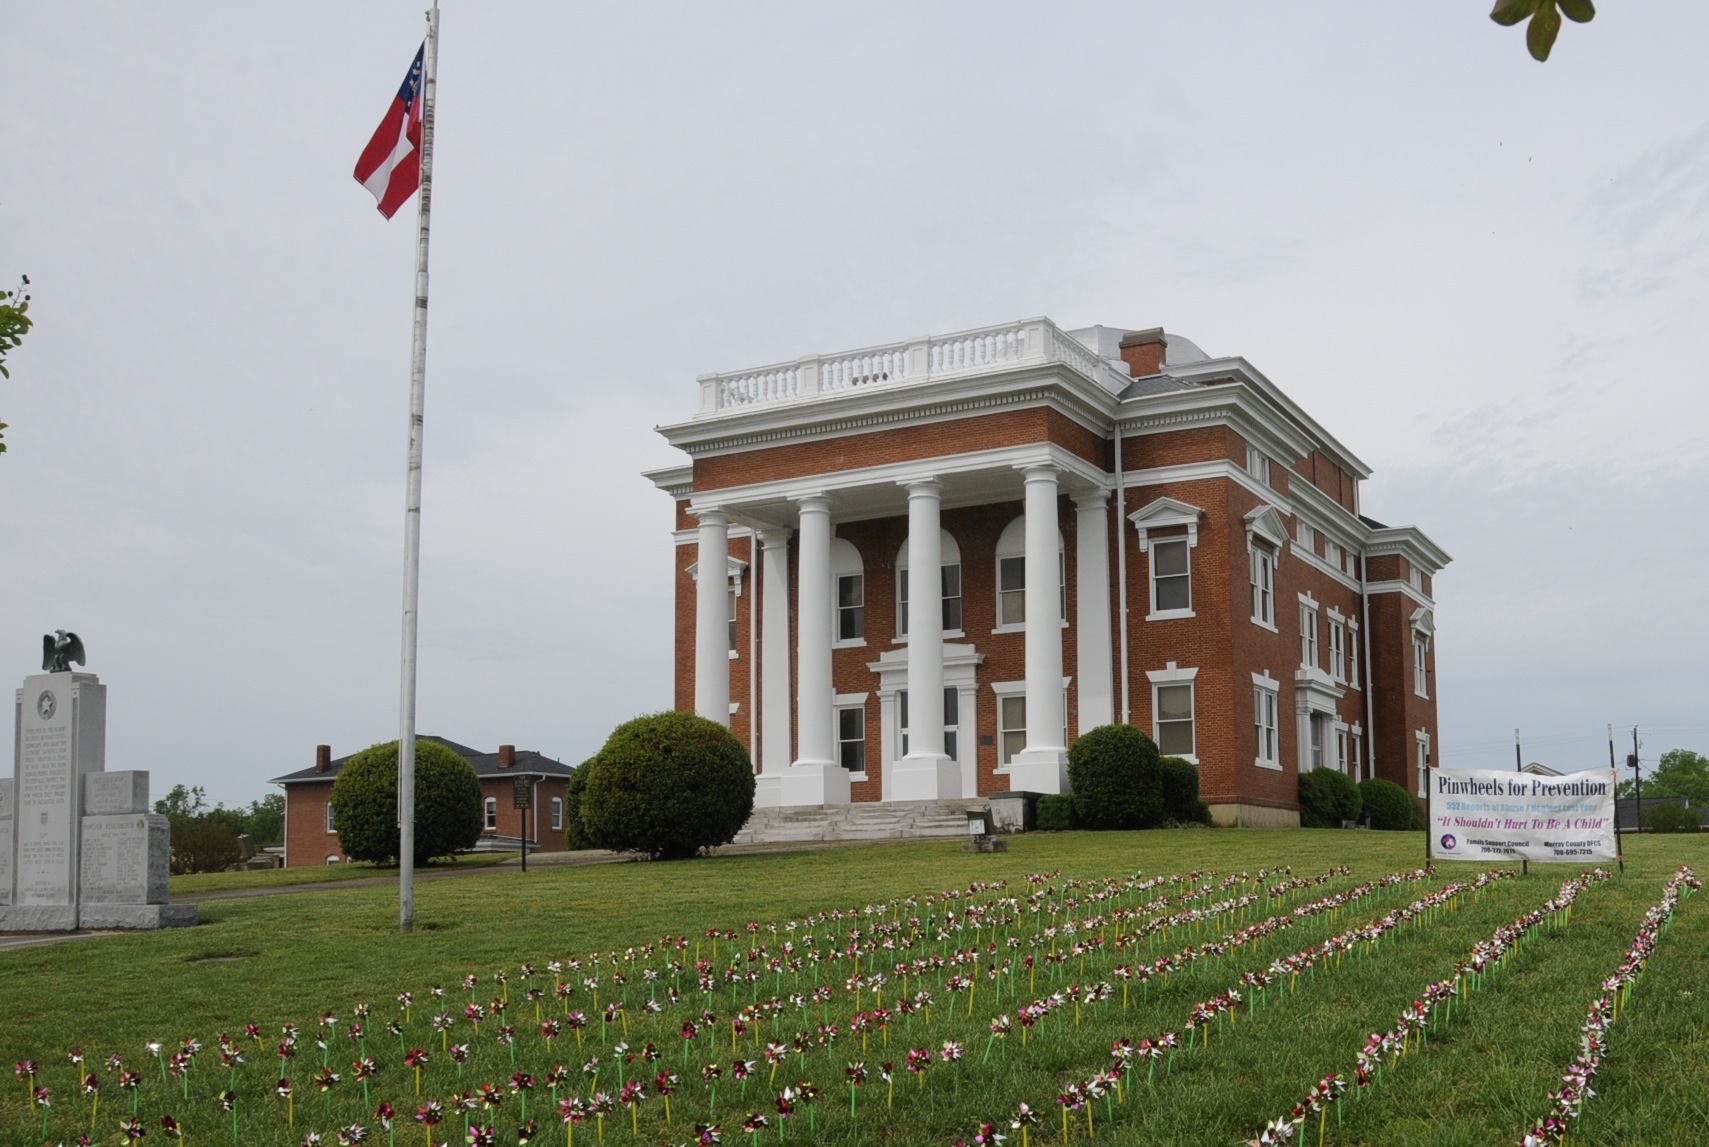 Each year the Family Support Council sponsors “Pinwheels for Prevention” in Murray and Whitfield Counties. Each pinwheel represents a reported case of child abuse or neglect.